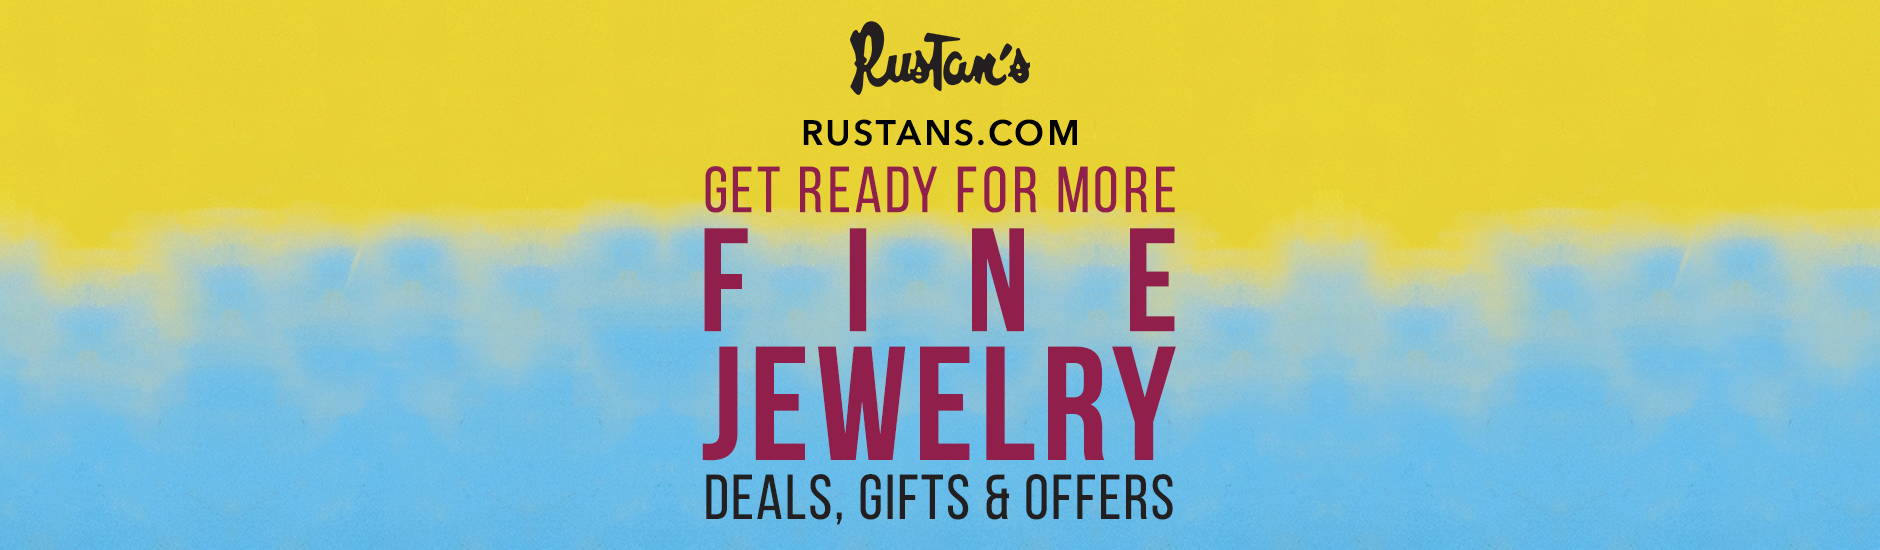 Get Ready for More Deals, Gifts & Offers: Fine Jewelry